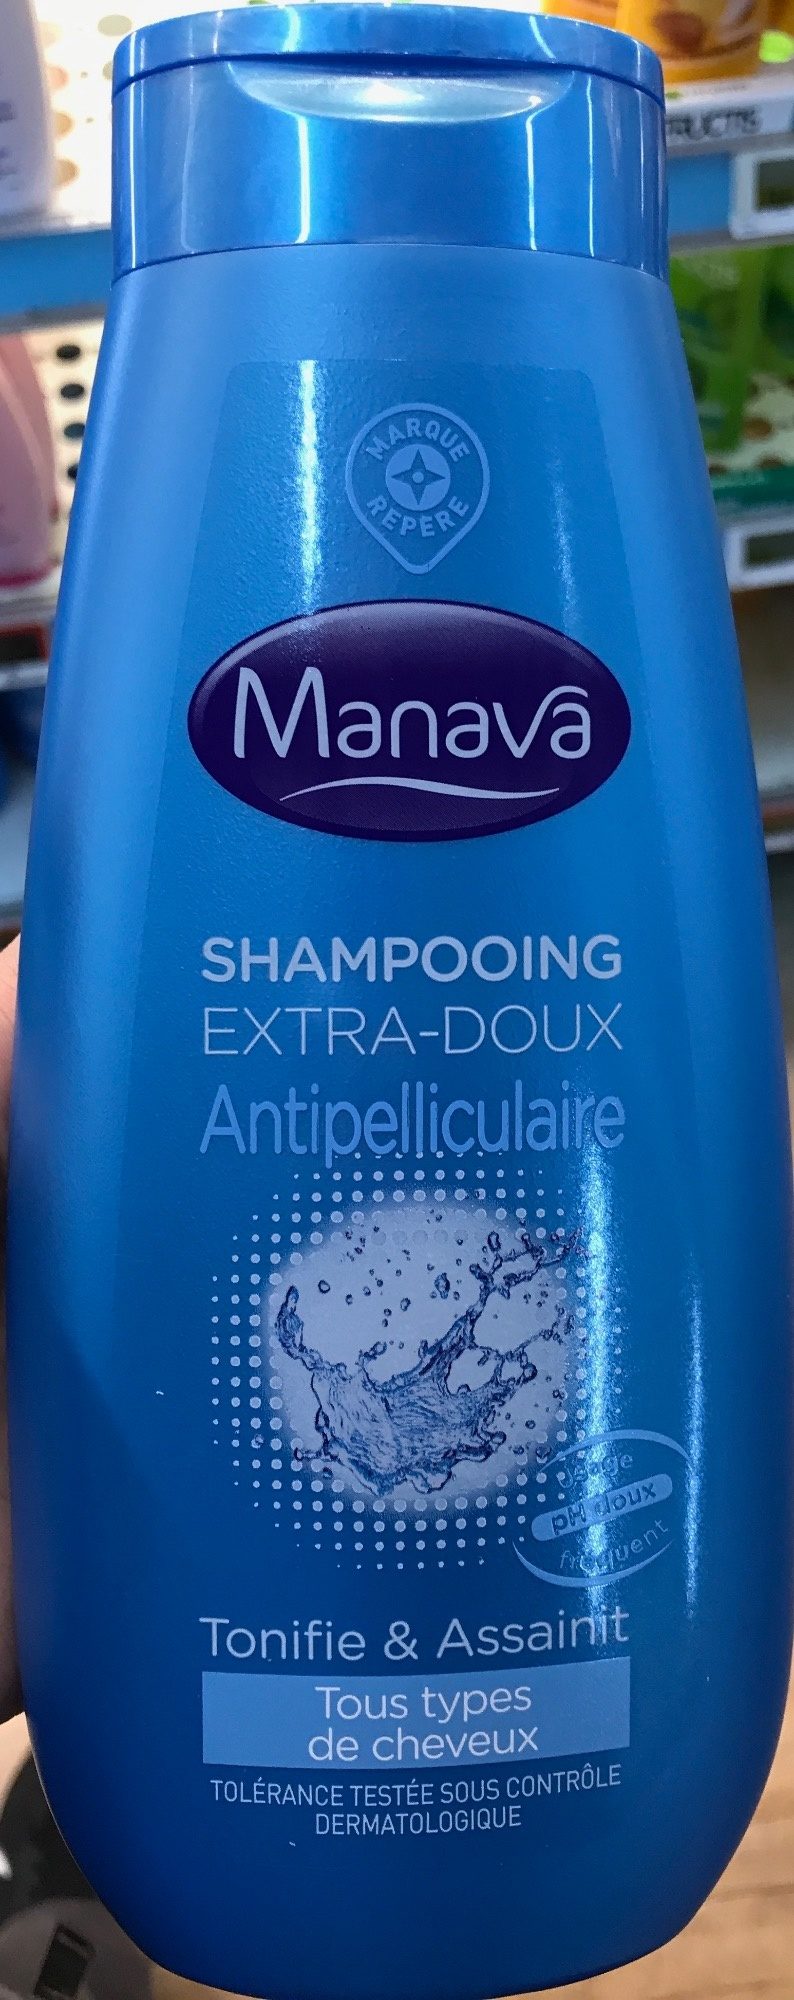 Shampooing extra-doux antipelliculaire - Tuote - fr